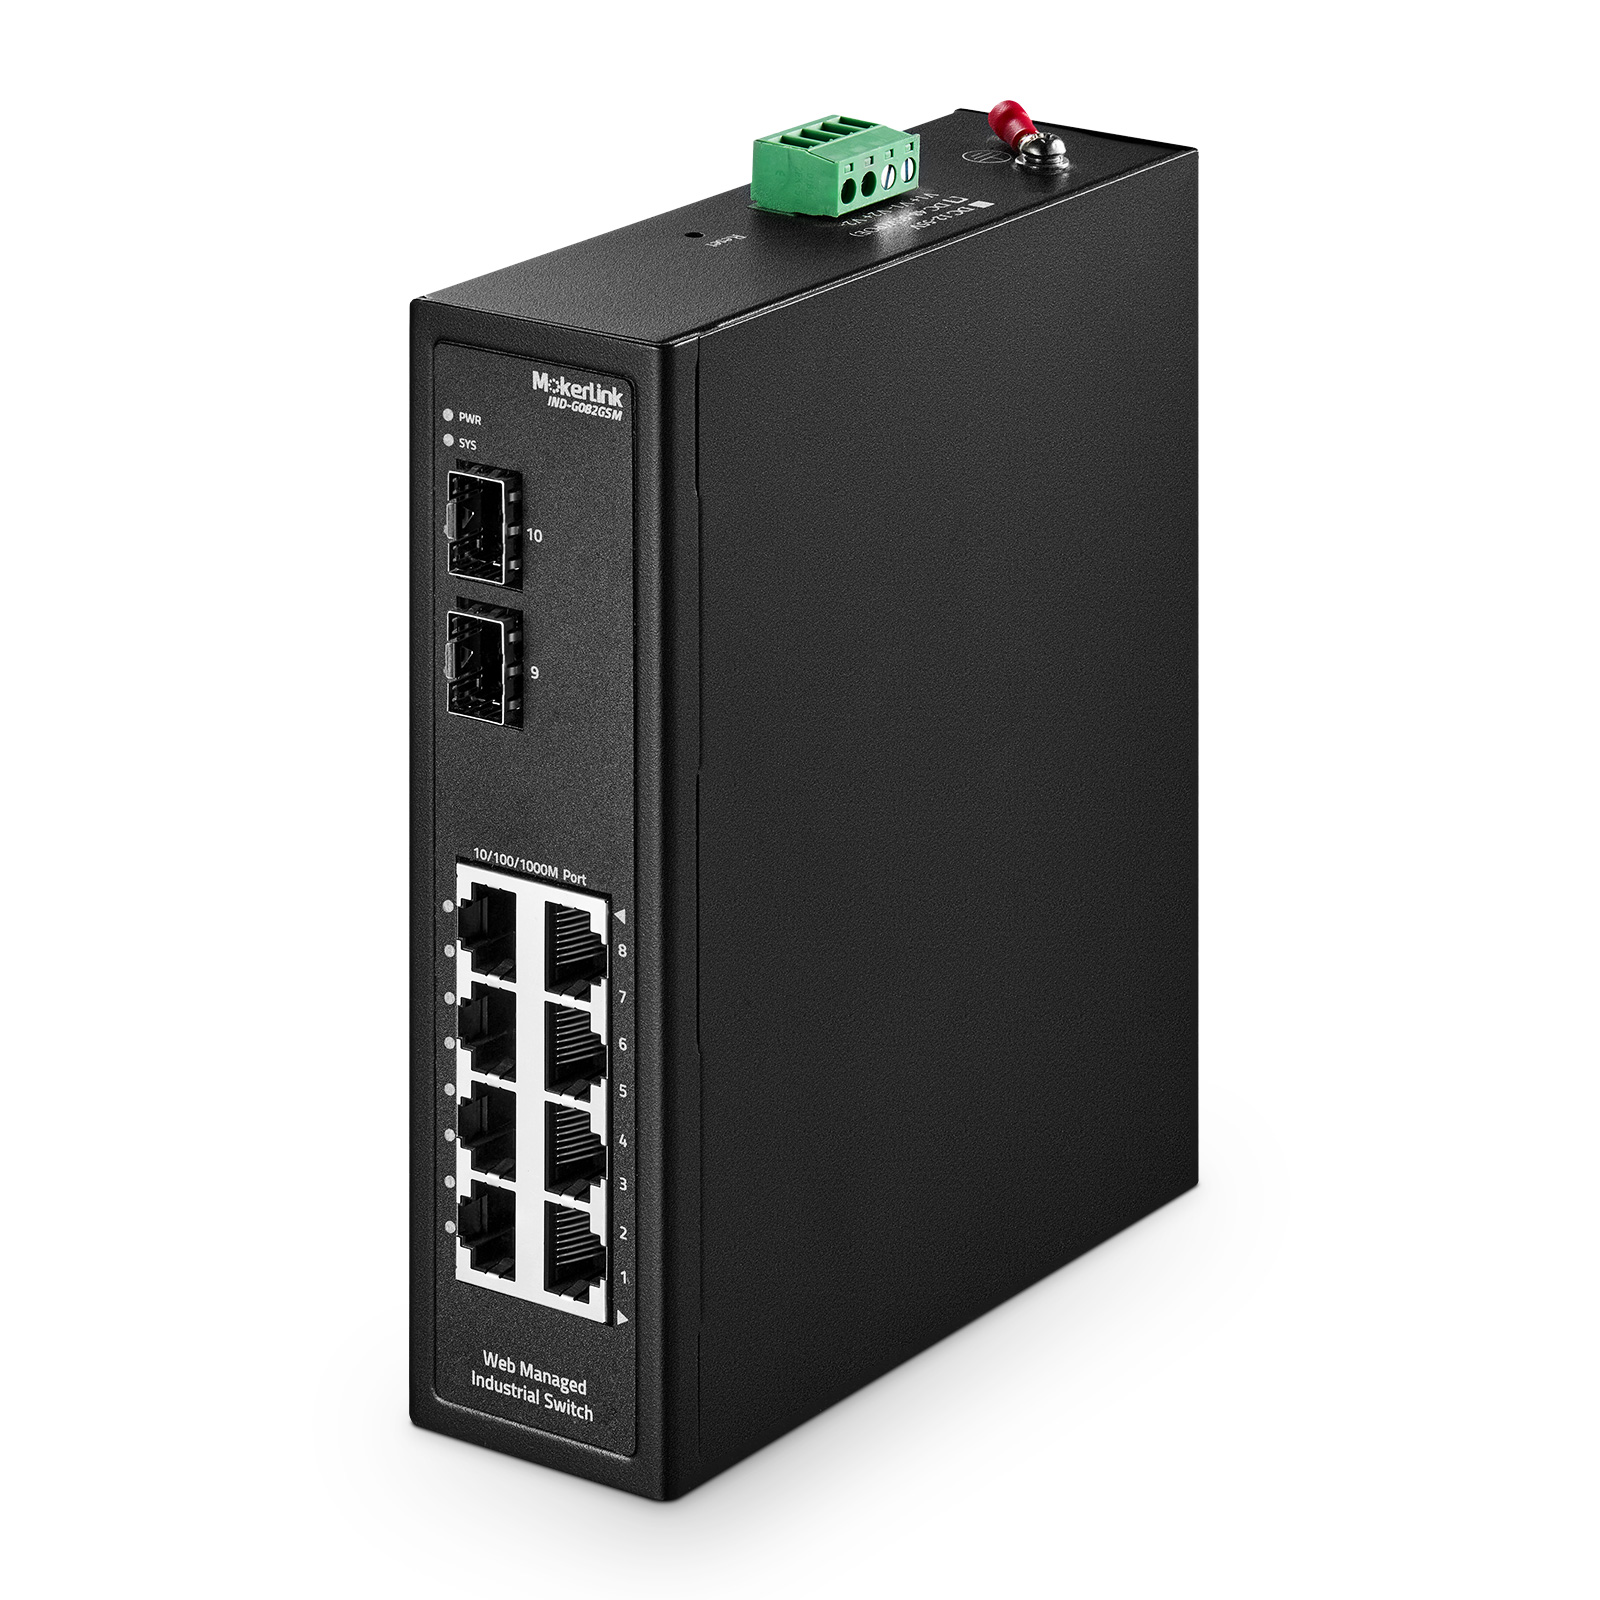 MokerLink Store - 10 Port Industrial Web Managed Switch